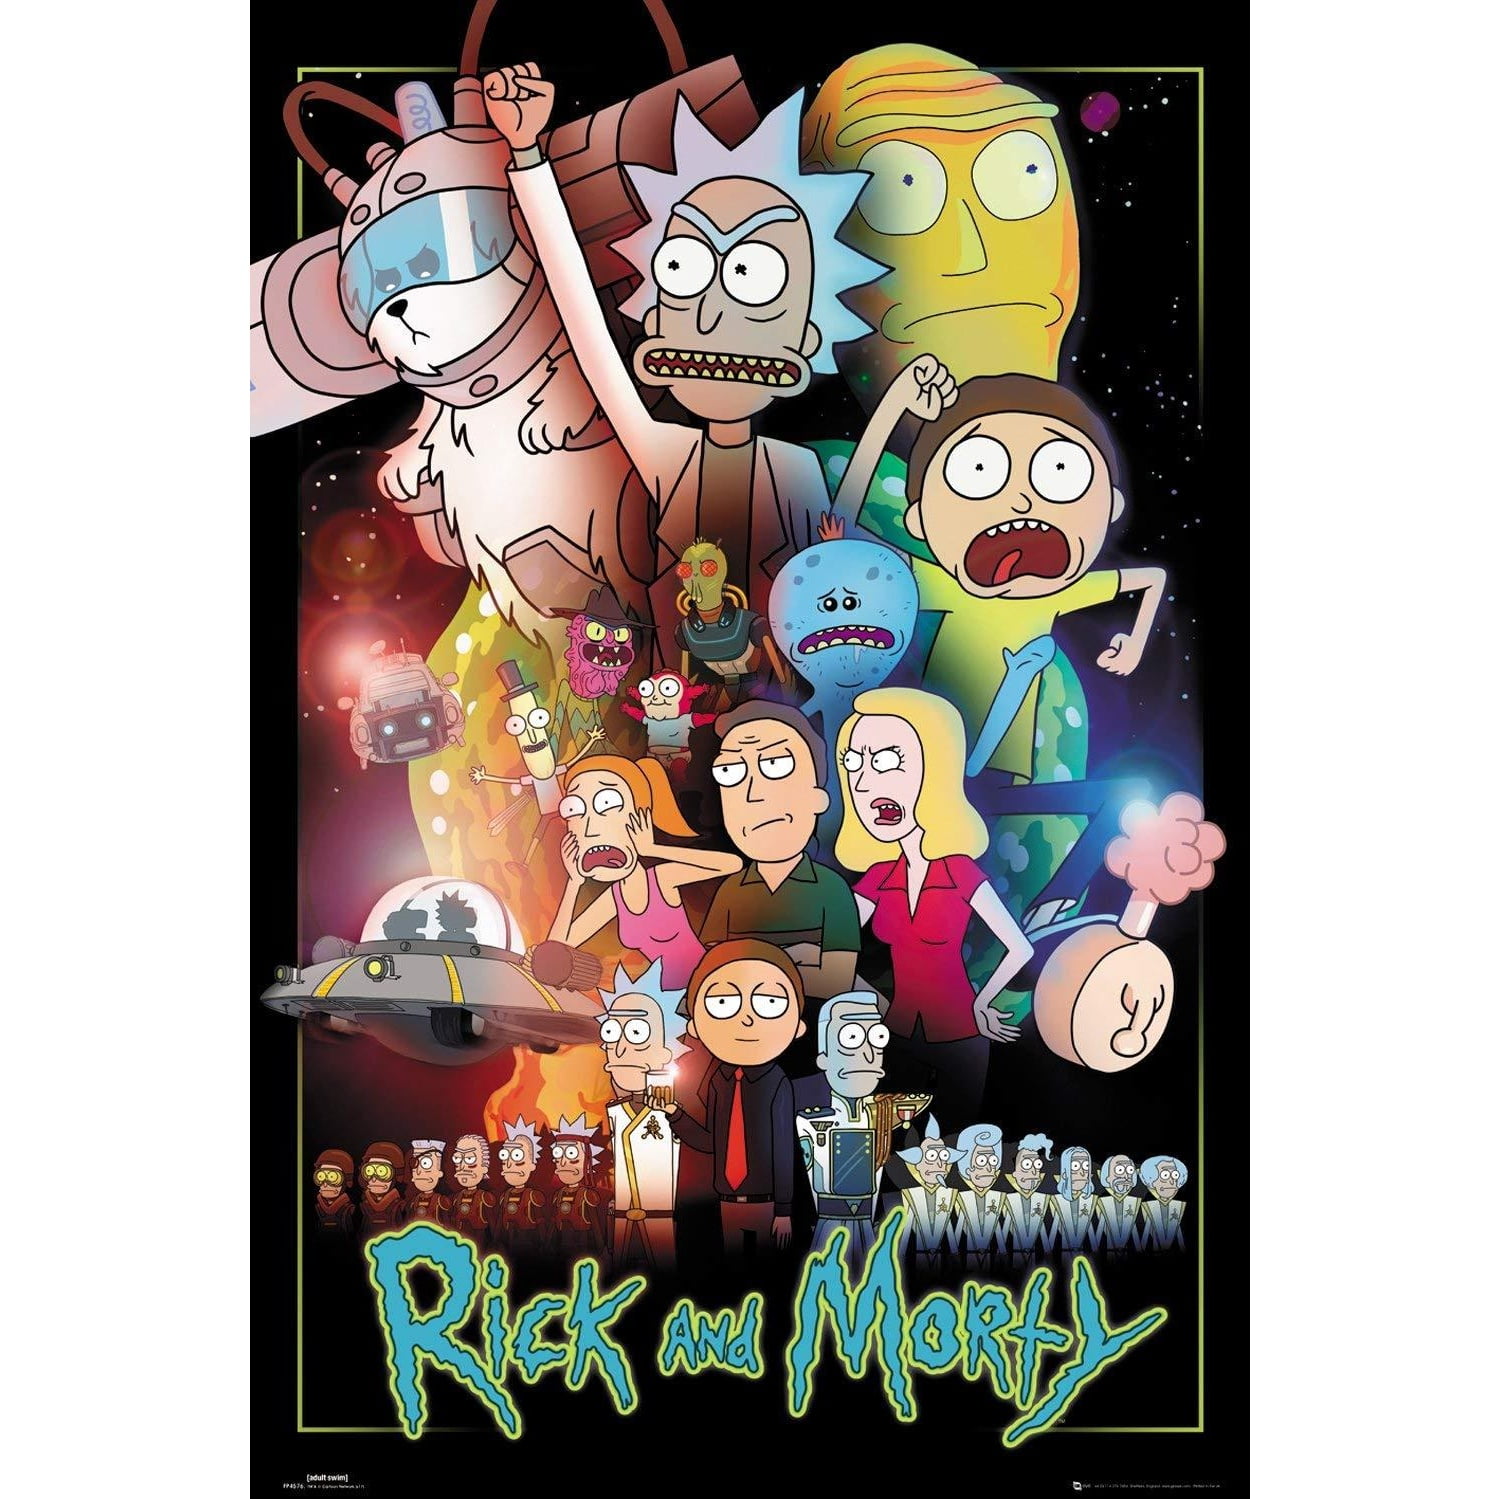 CARTOON NETWORK ADULT SWIM RICK AND MORTY FAMILY ROOM POSTER 36x24 NEW 